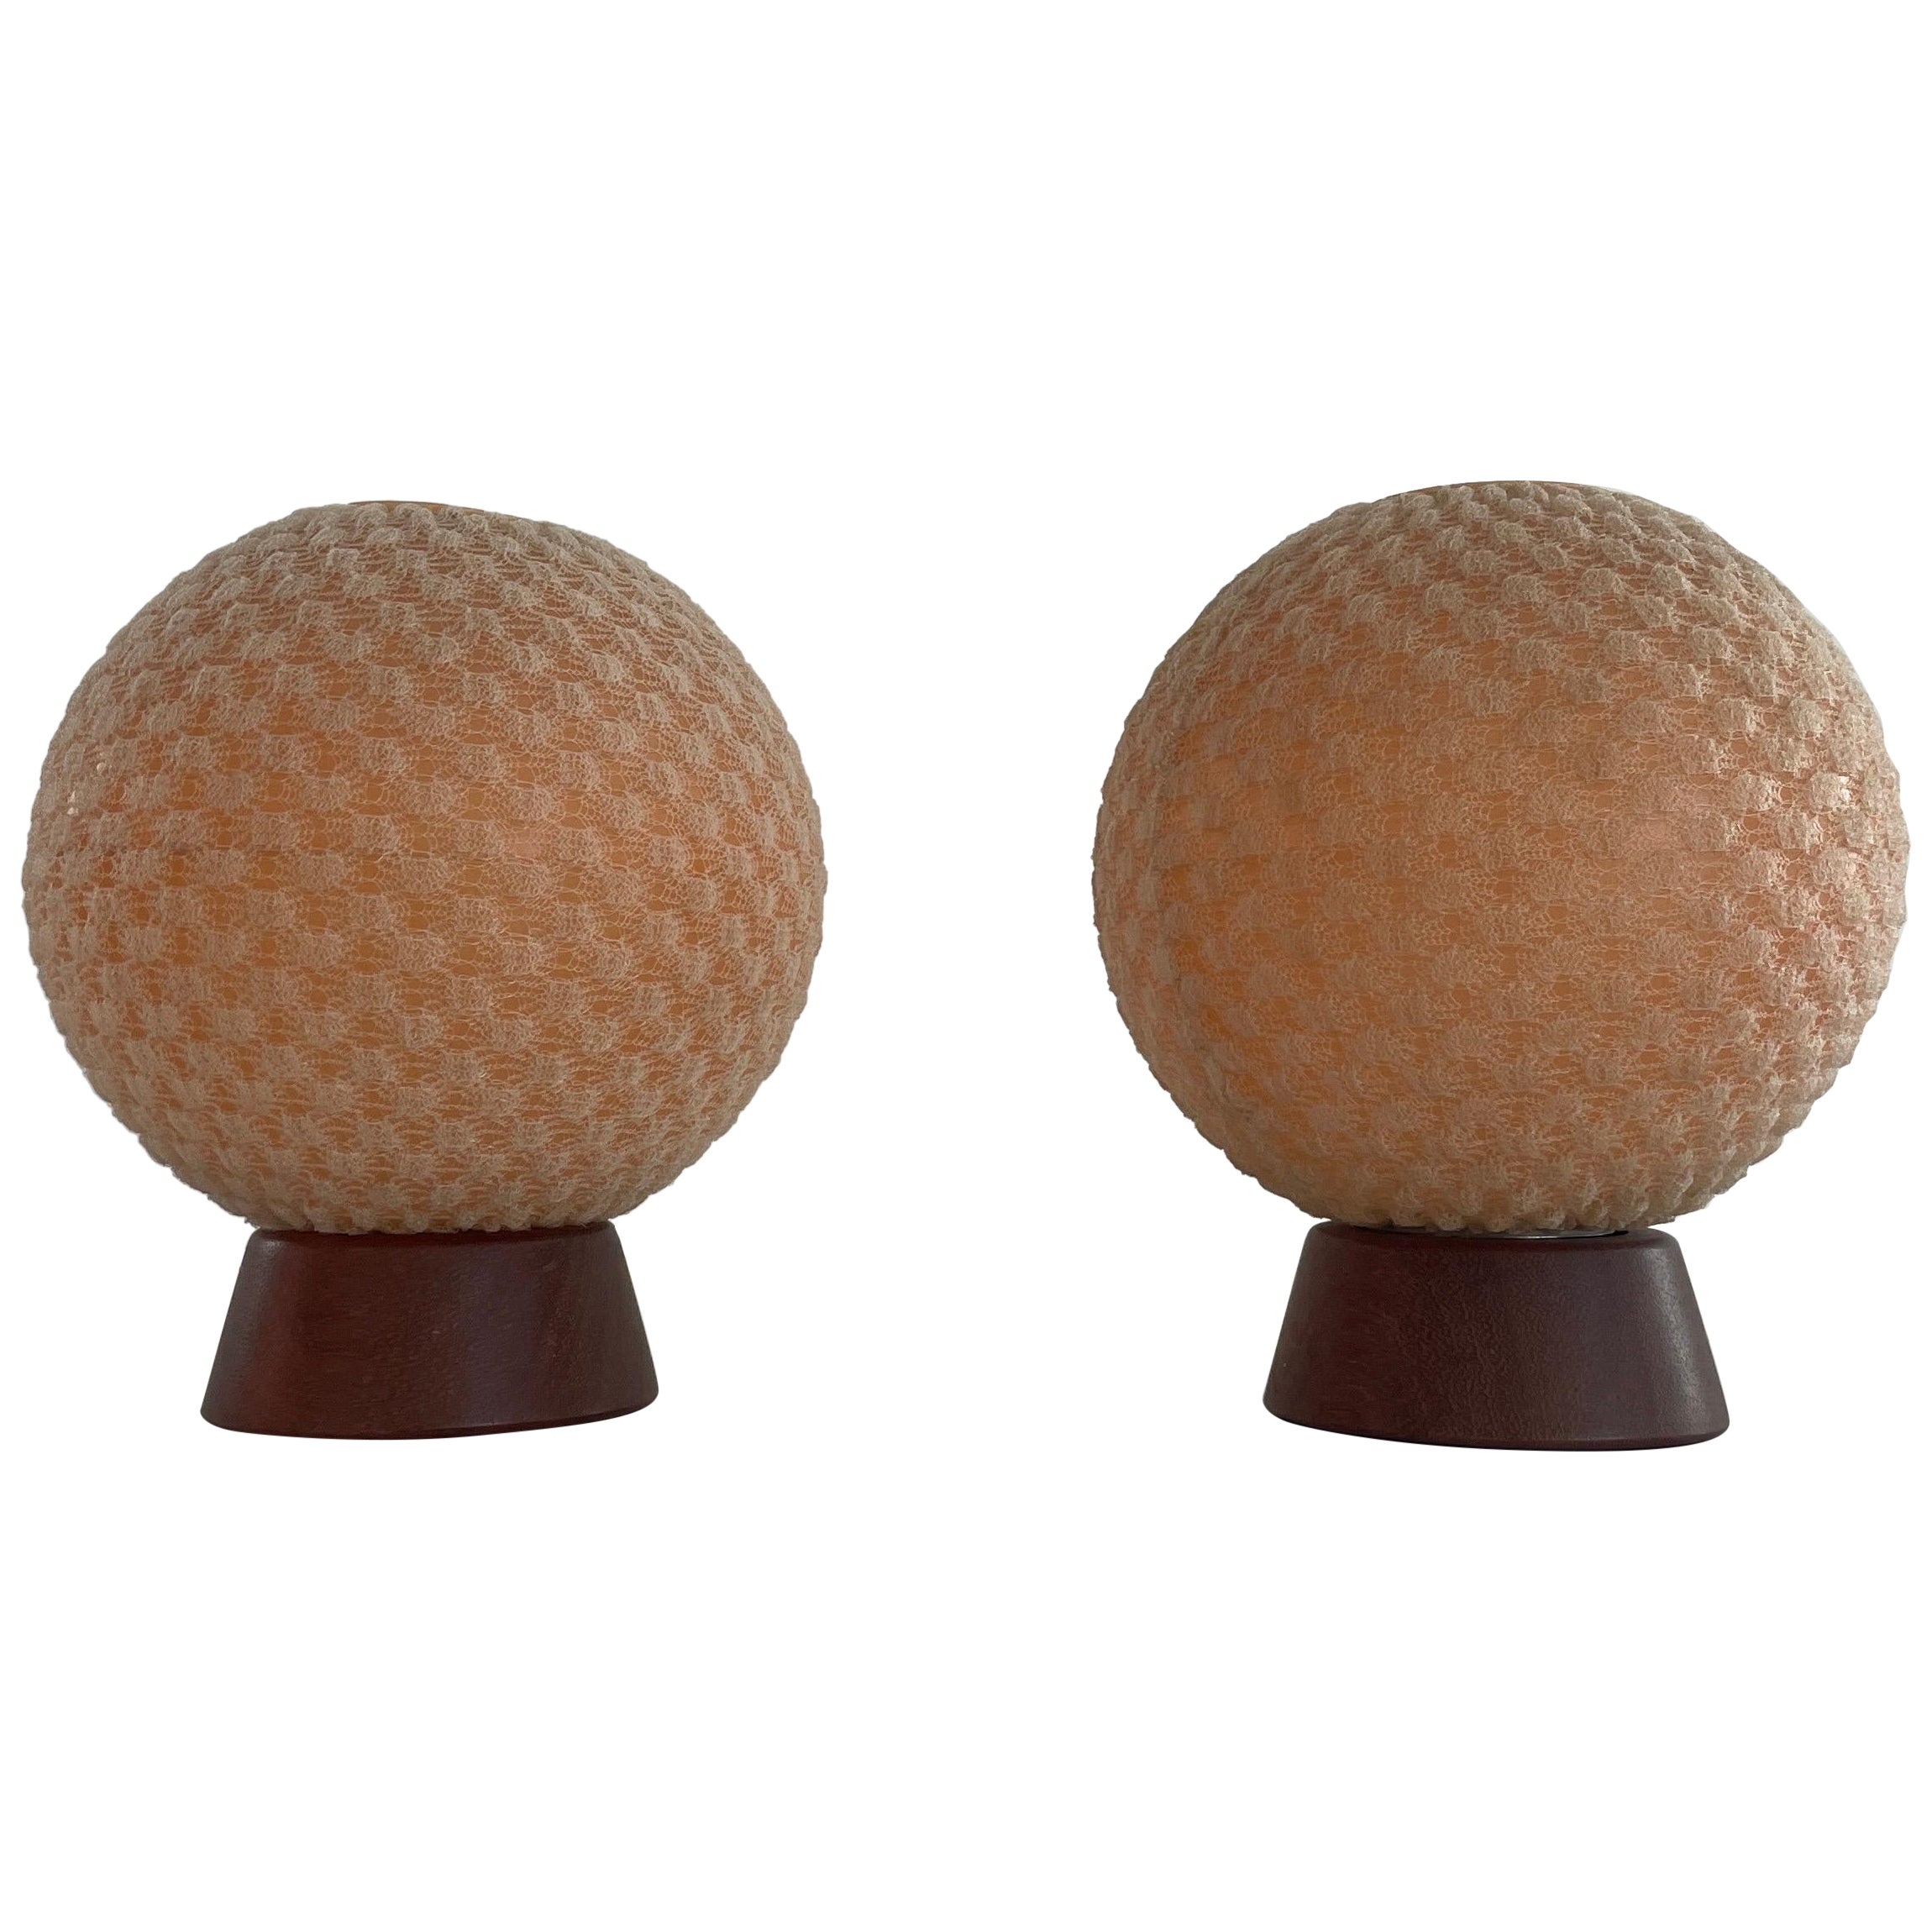 Teak & Ball Fabric Shade Pair of Bedside Lamps by Temde, 1960s Germany